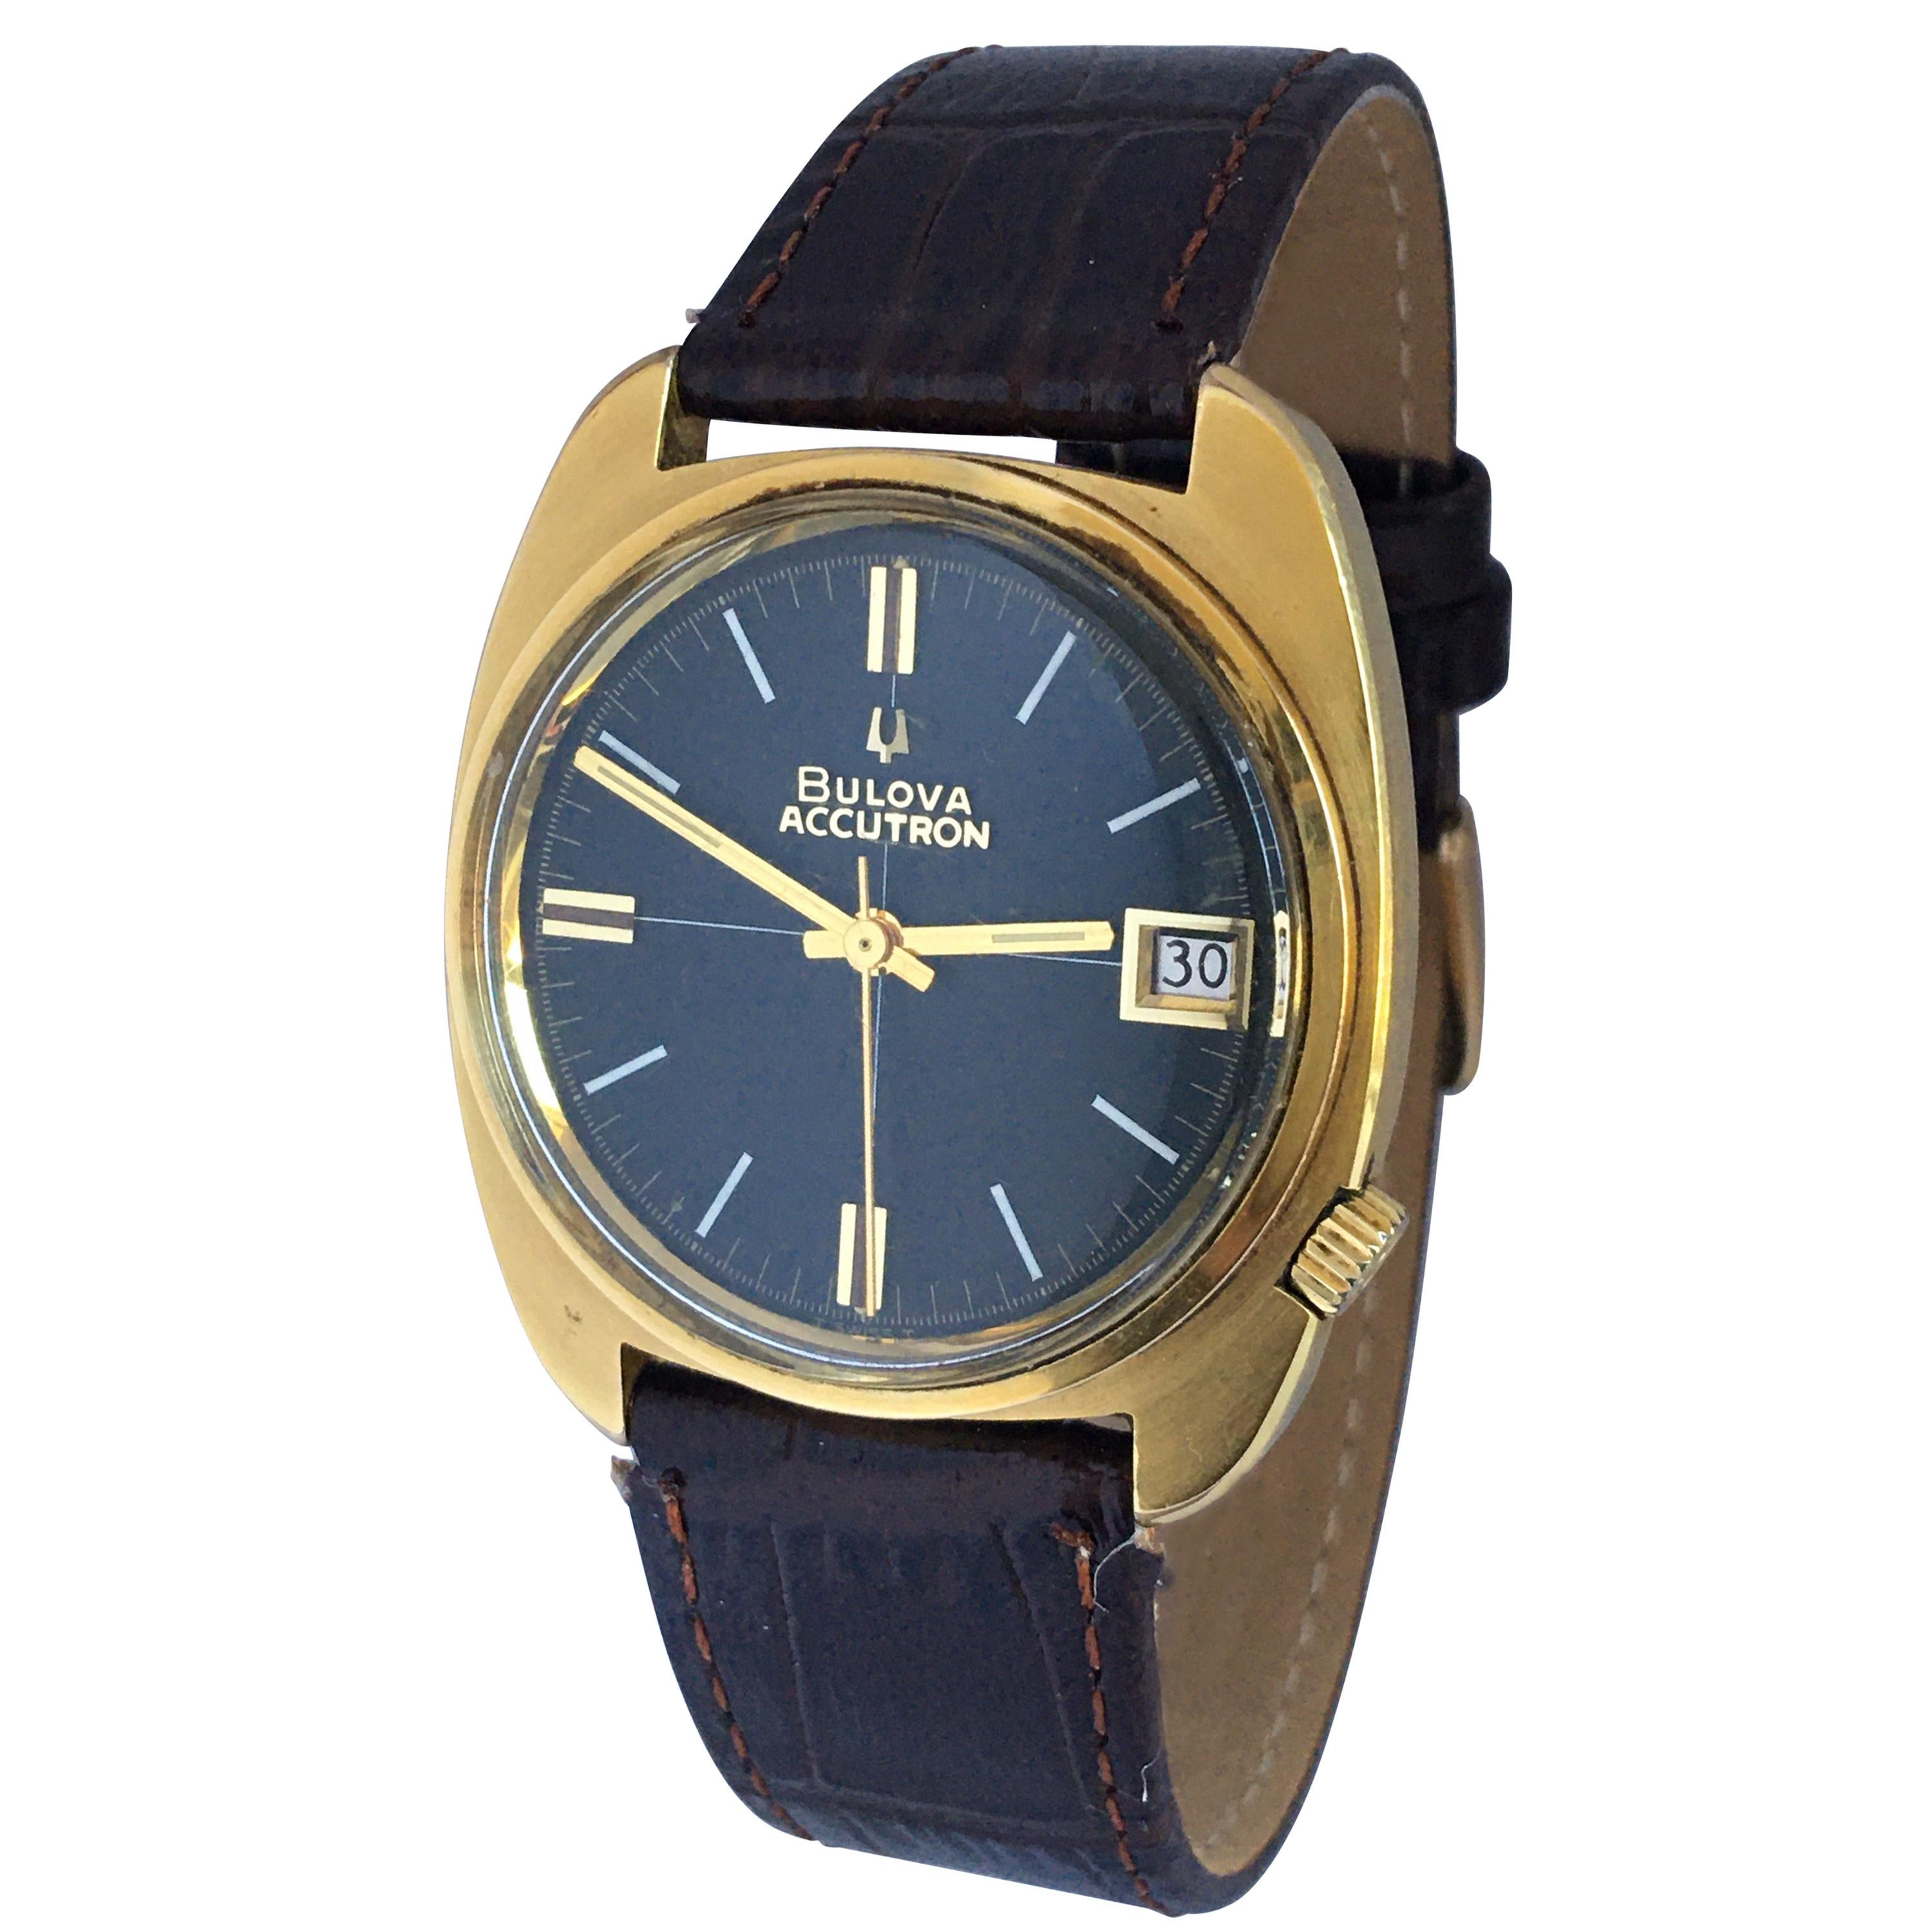 Vintage 1970s Gold-Plated Bulova Accutron Gent Watch